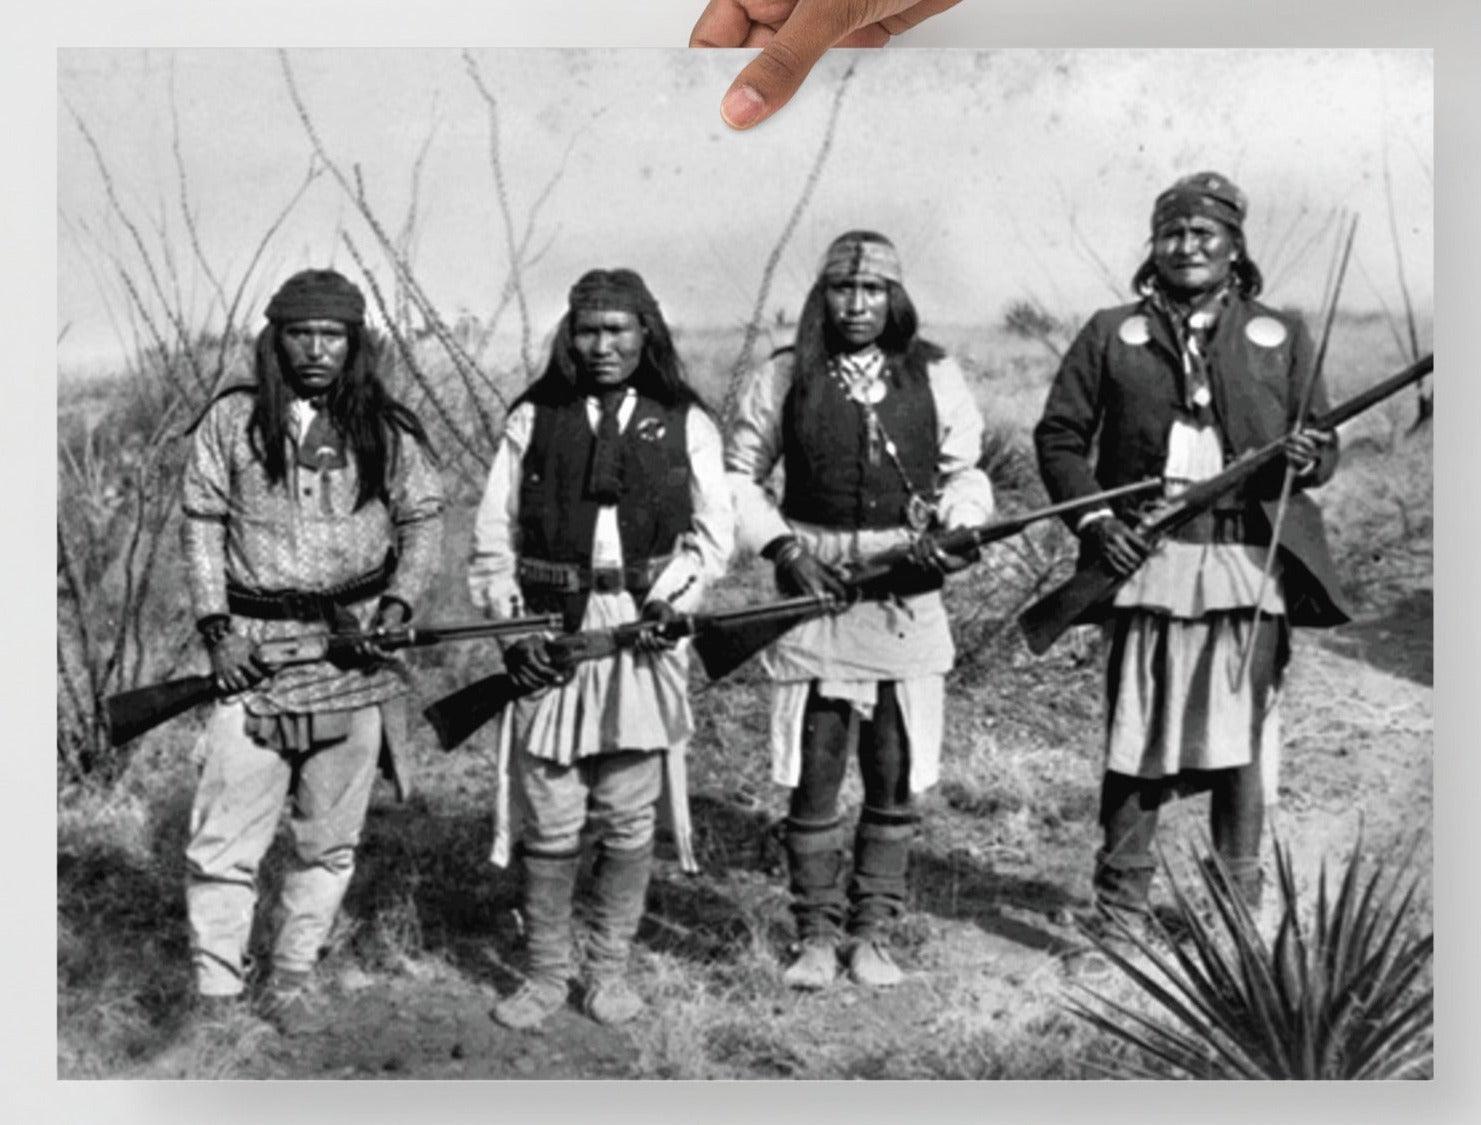 A Geronimo and His Warriors poster on a plain backdrop in size 18x24”.